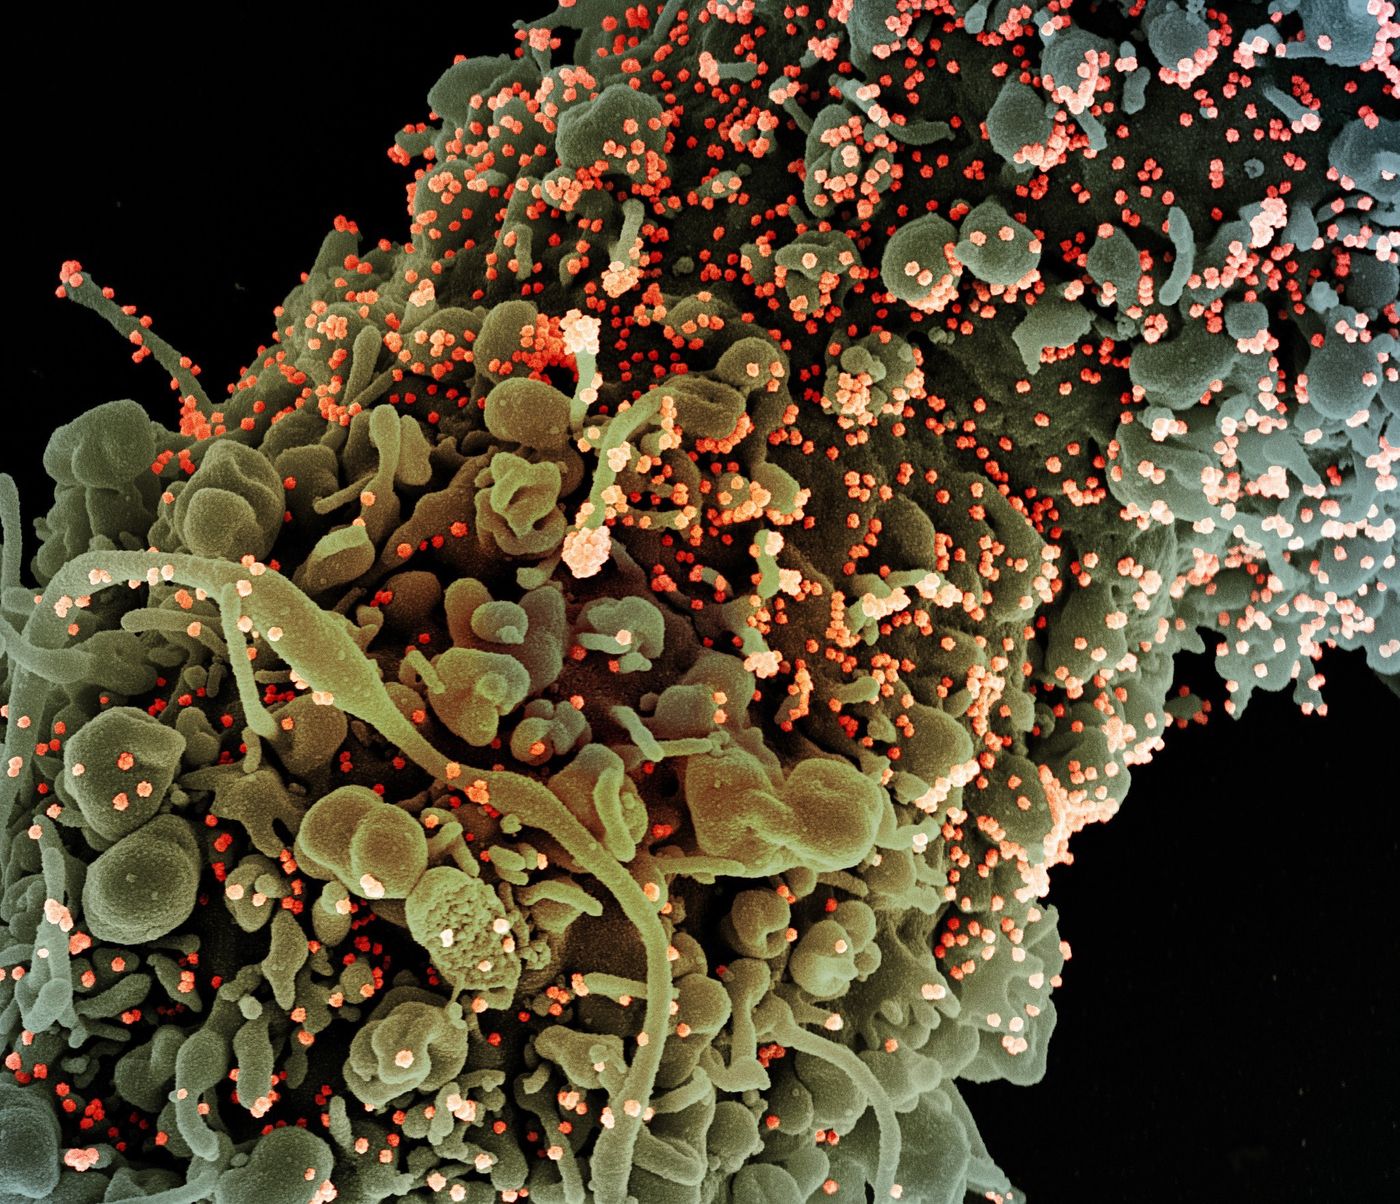 Colorized scanning electron micrograph of a cell showing morphological signs of apoptosis, infected with SARS-COV-2 virus particles (orange), isolated from a patient sample. Image captured at the NIAID Integrated Research Facility (IRF) in Fort Detrick, Maryland. / Credit: NIAID